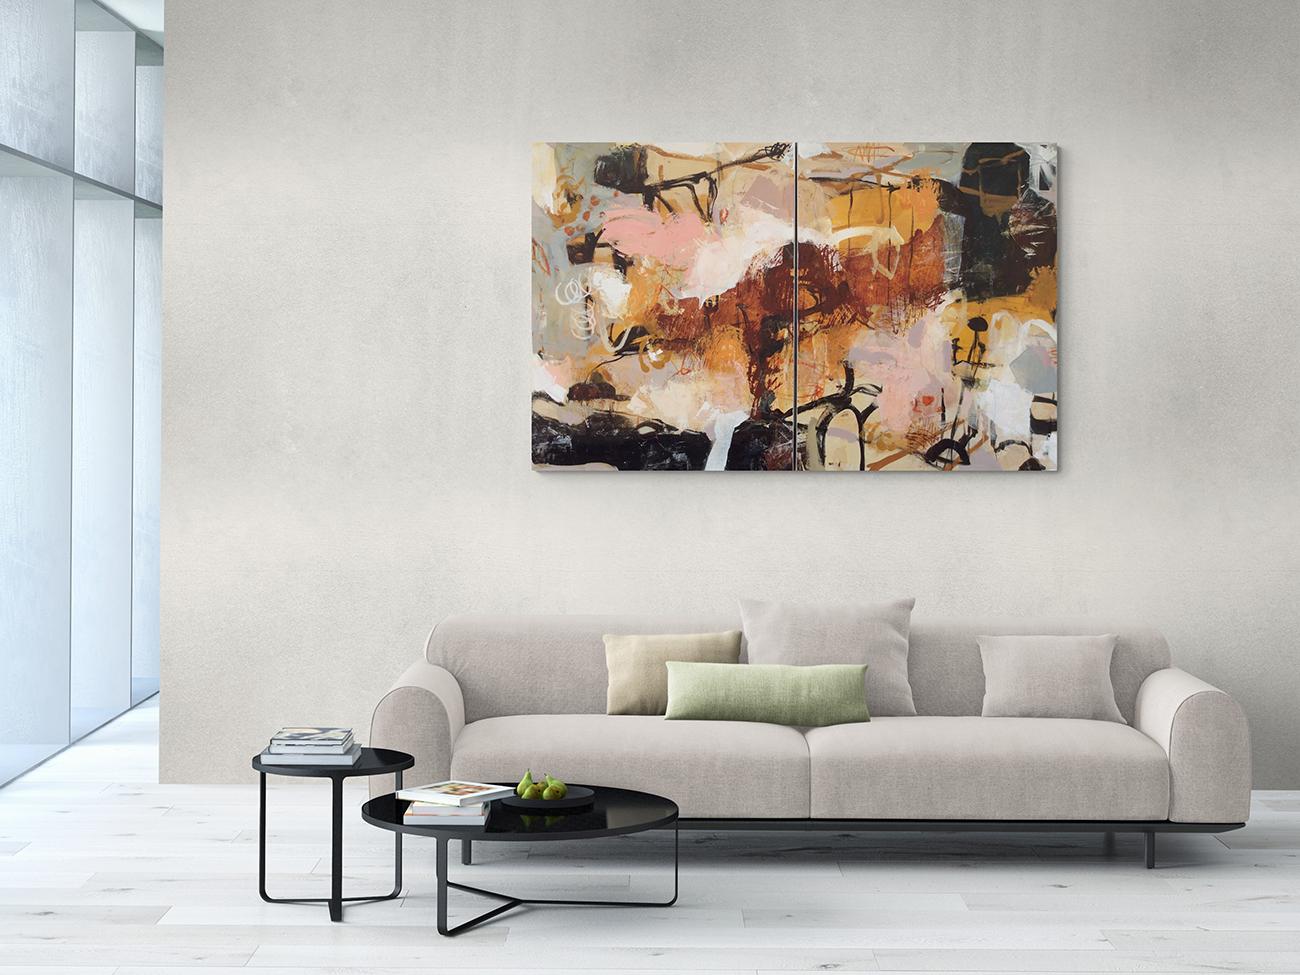 Poetry Of Life - Diptych 1 (Abstrac Painting) - Beige Abstract Painting by Linda Coppens